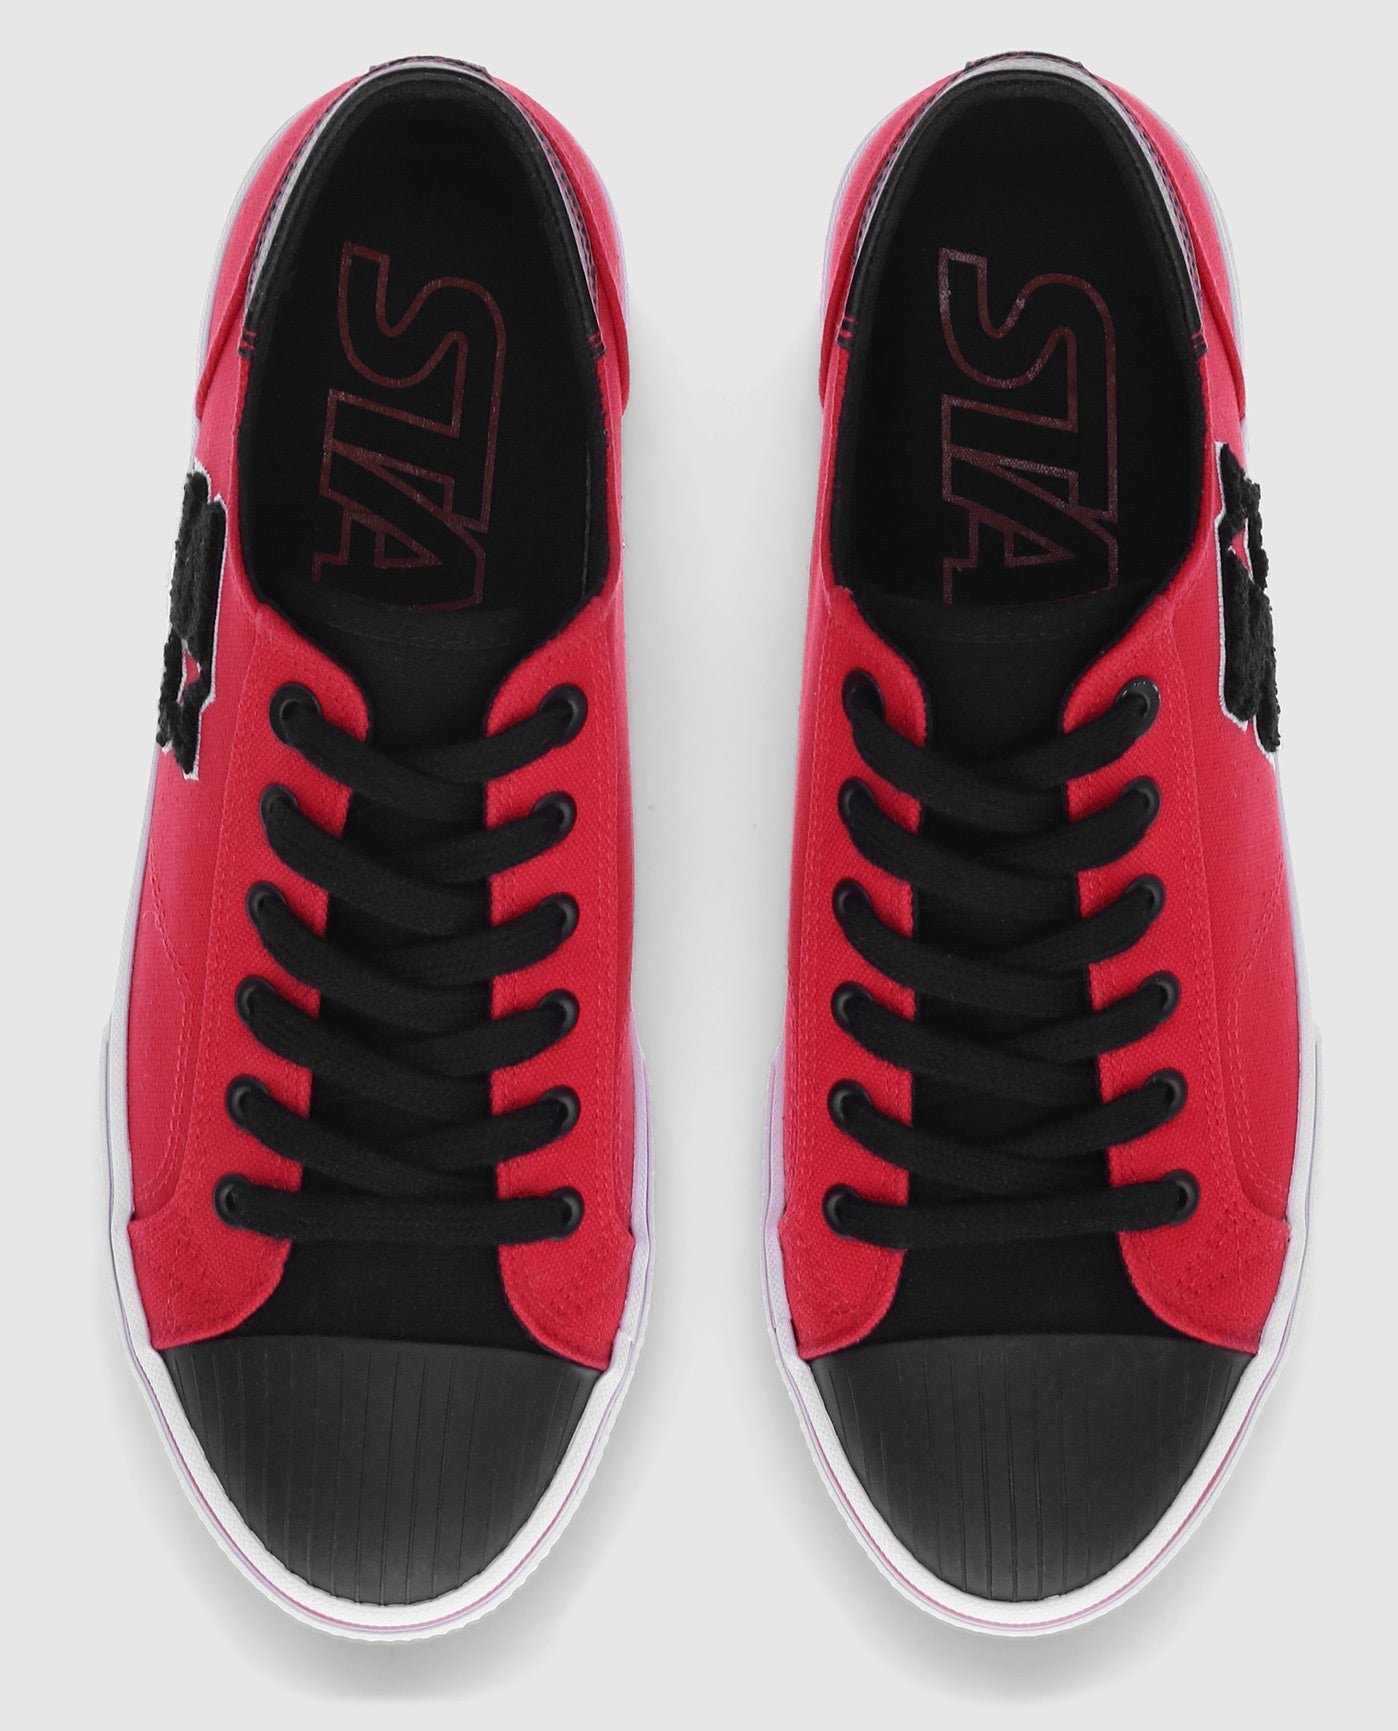 Top Angle Of Starter Tradition 71 Low Red Sneaker Pair | Red